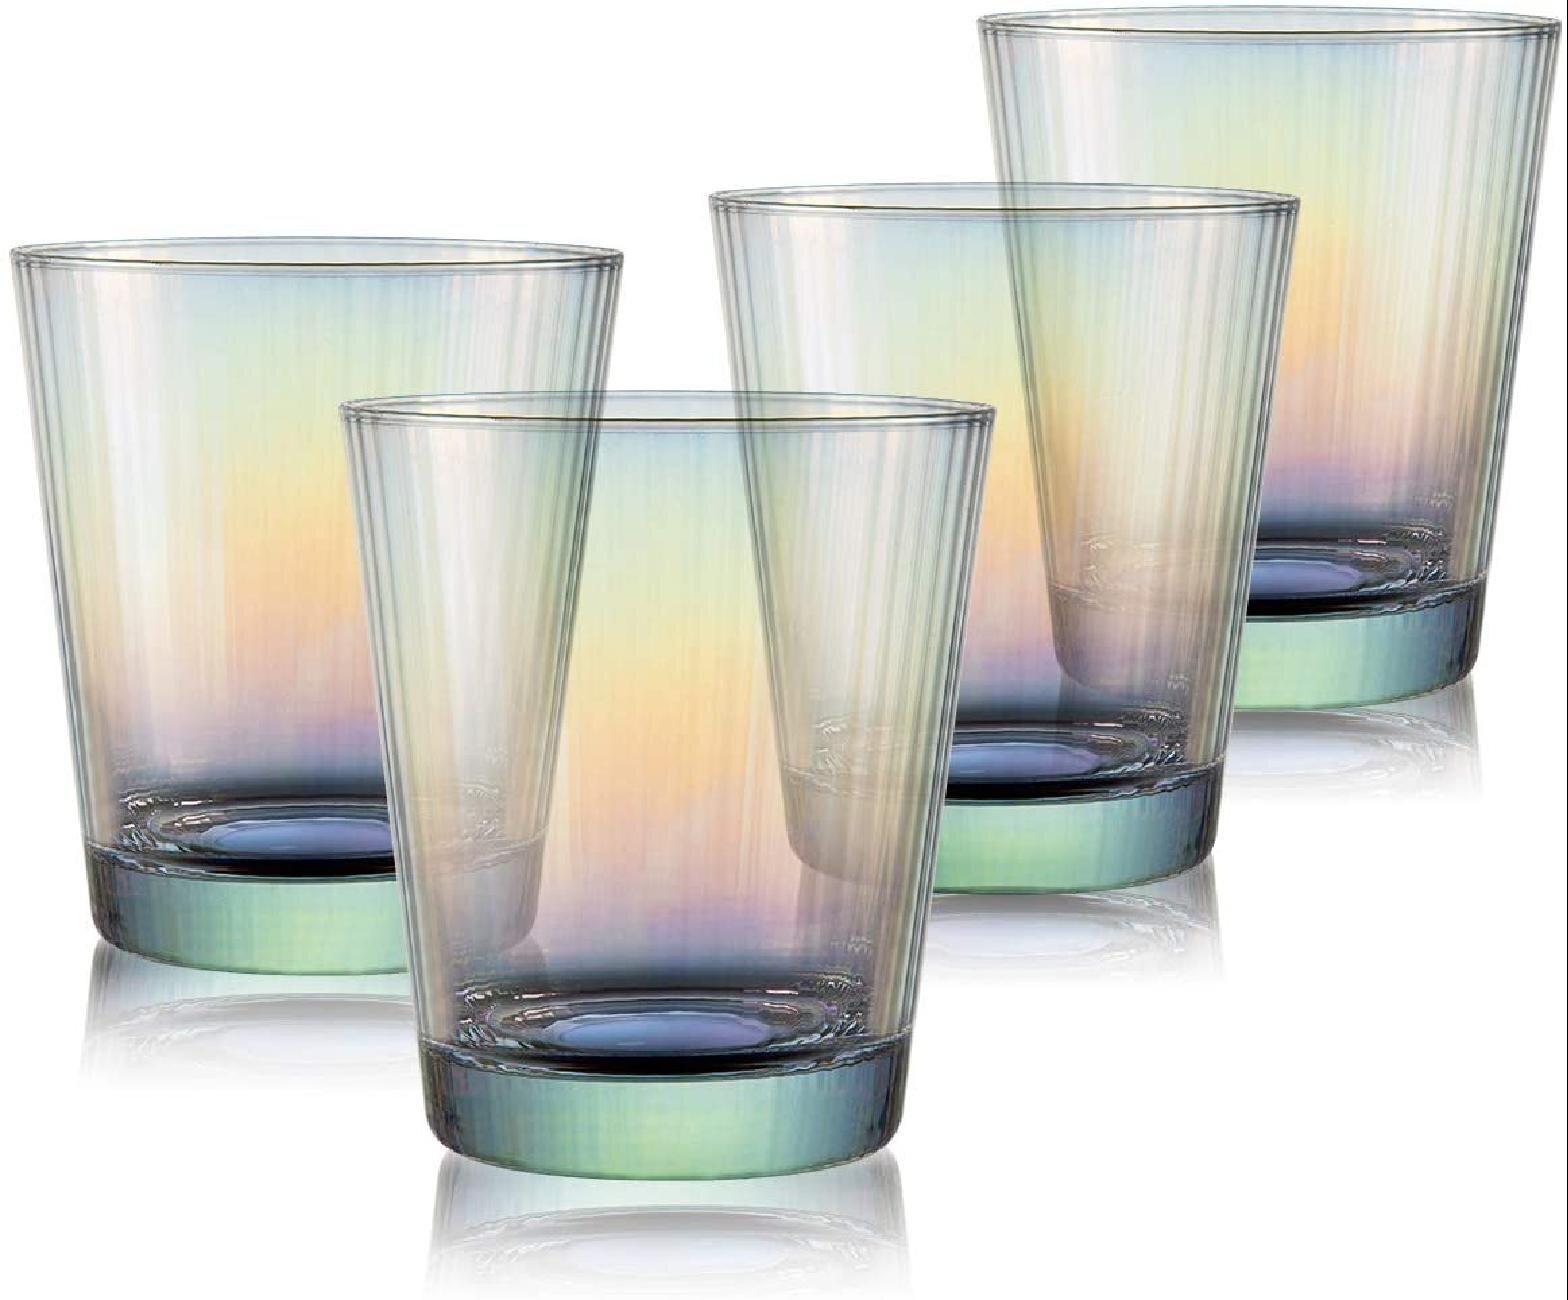 Dishwasher /& Microwave Safe Restaurants and Parties Glass Set Drinking Tumblers Juice Beverage Highball Glasses Cocktail Barware Glass Perfect for Home 6 Pcs